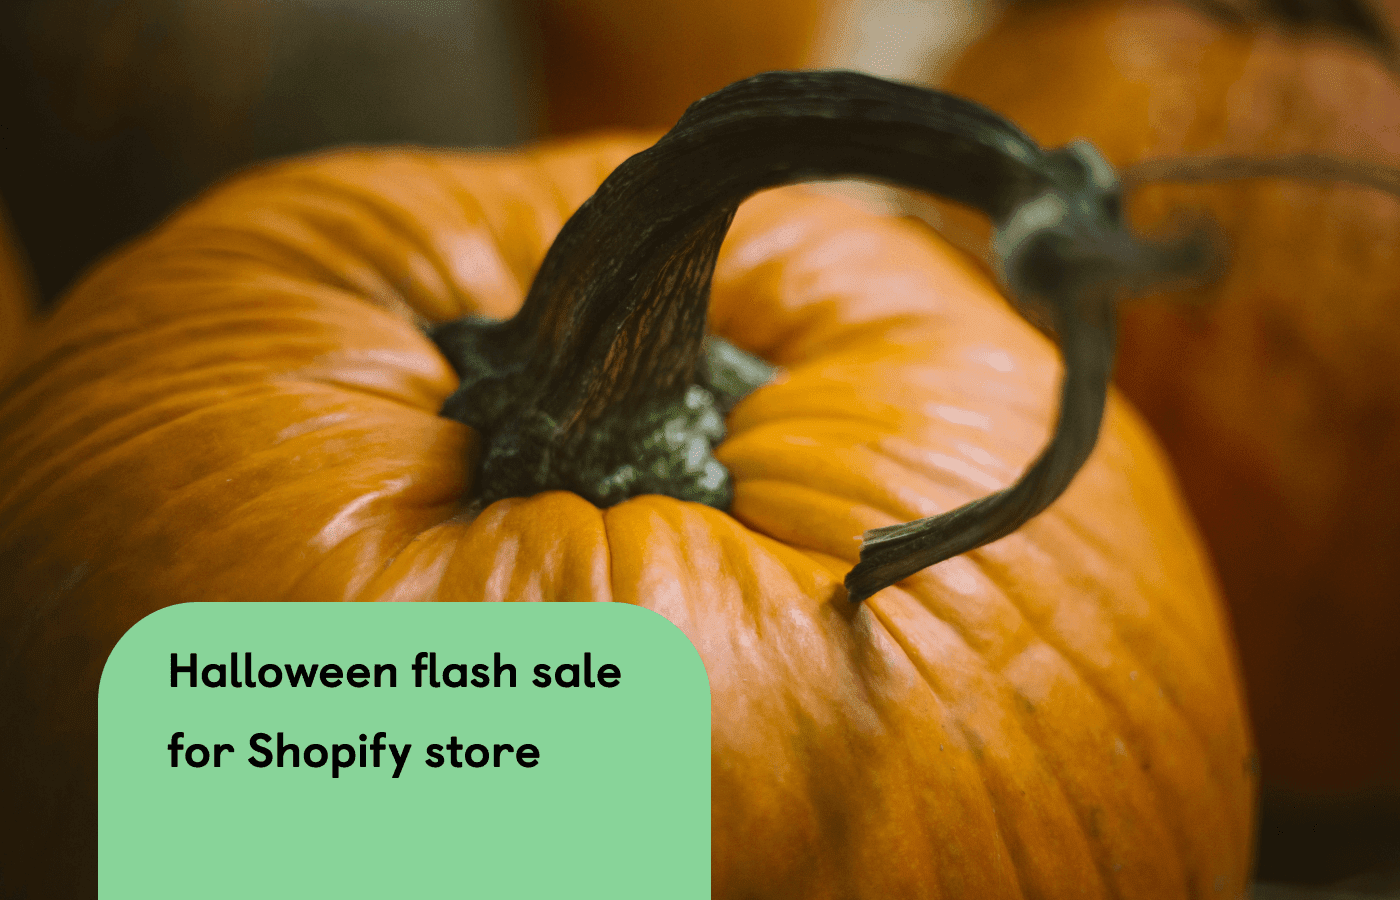 How to boost profits for your Shopify store with a Halloween flash sale